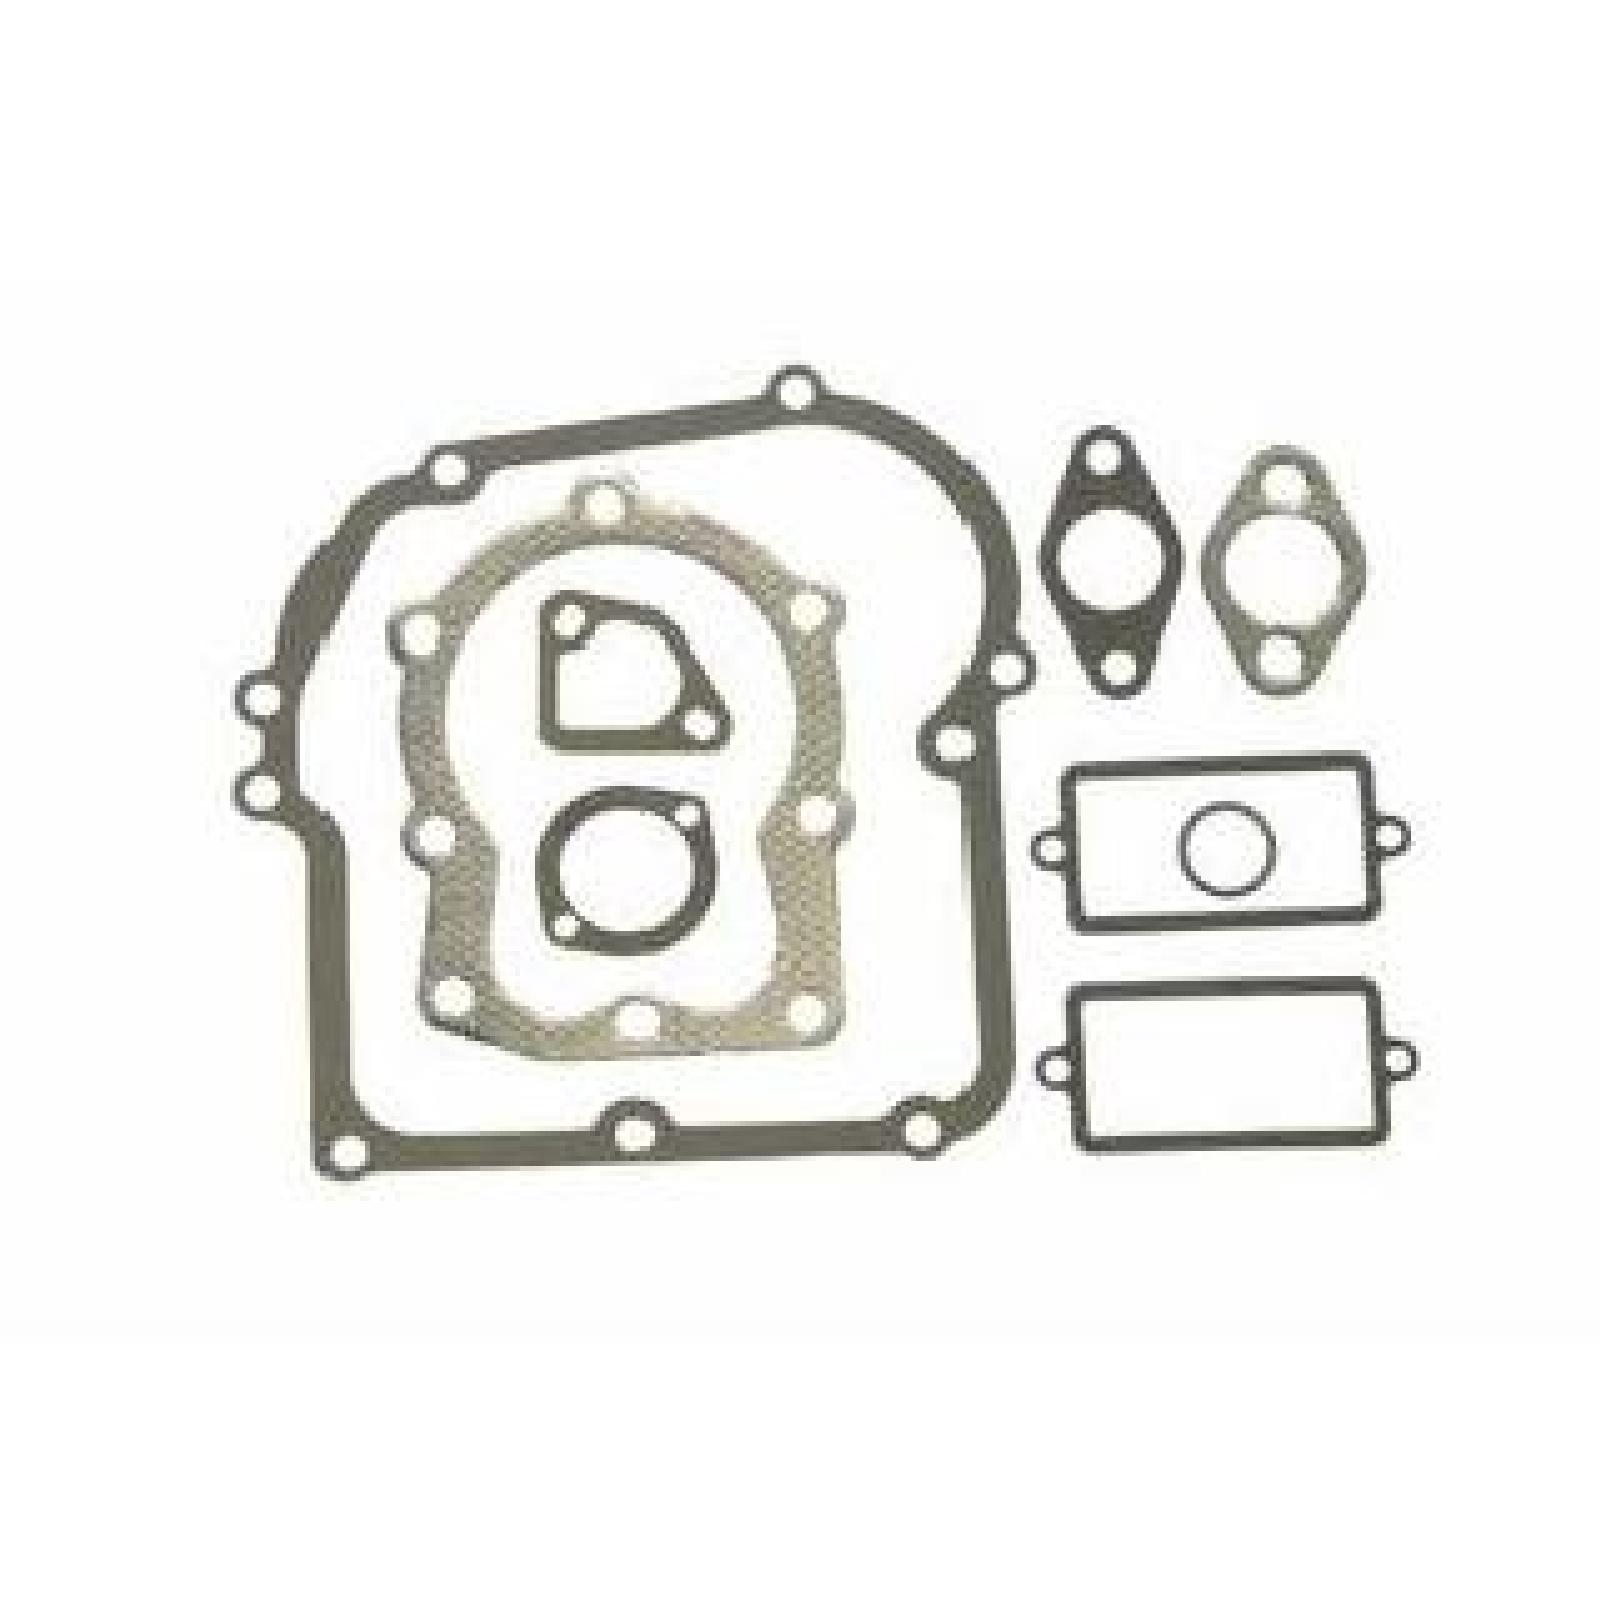 GASKET SET part# 36444 by Tecumseh - Click Image to Close